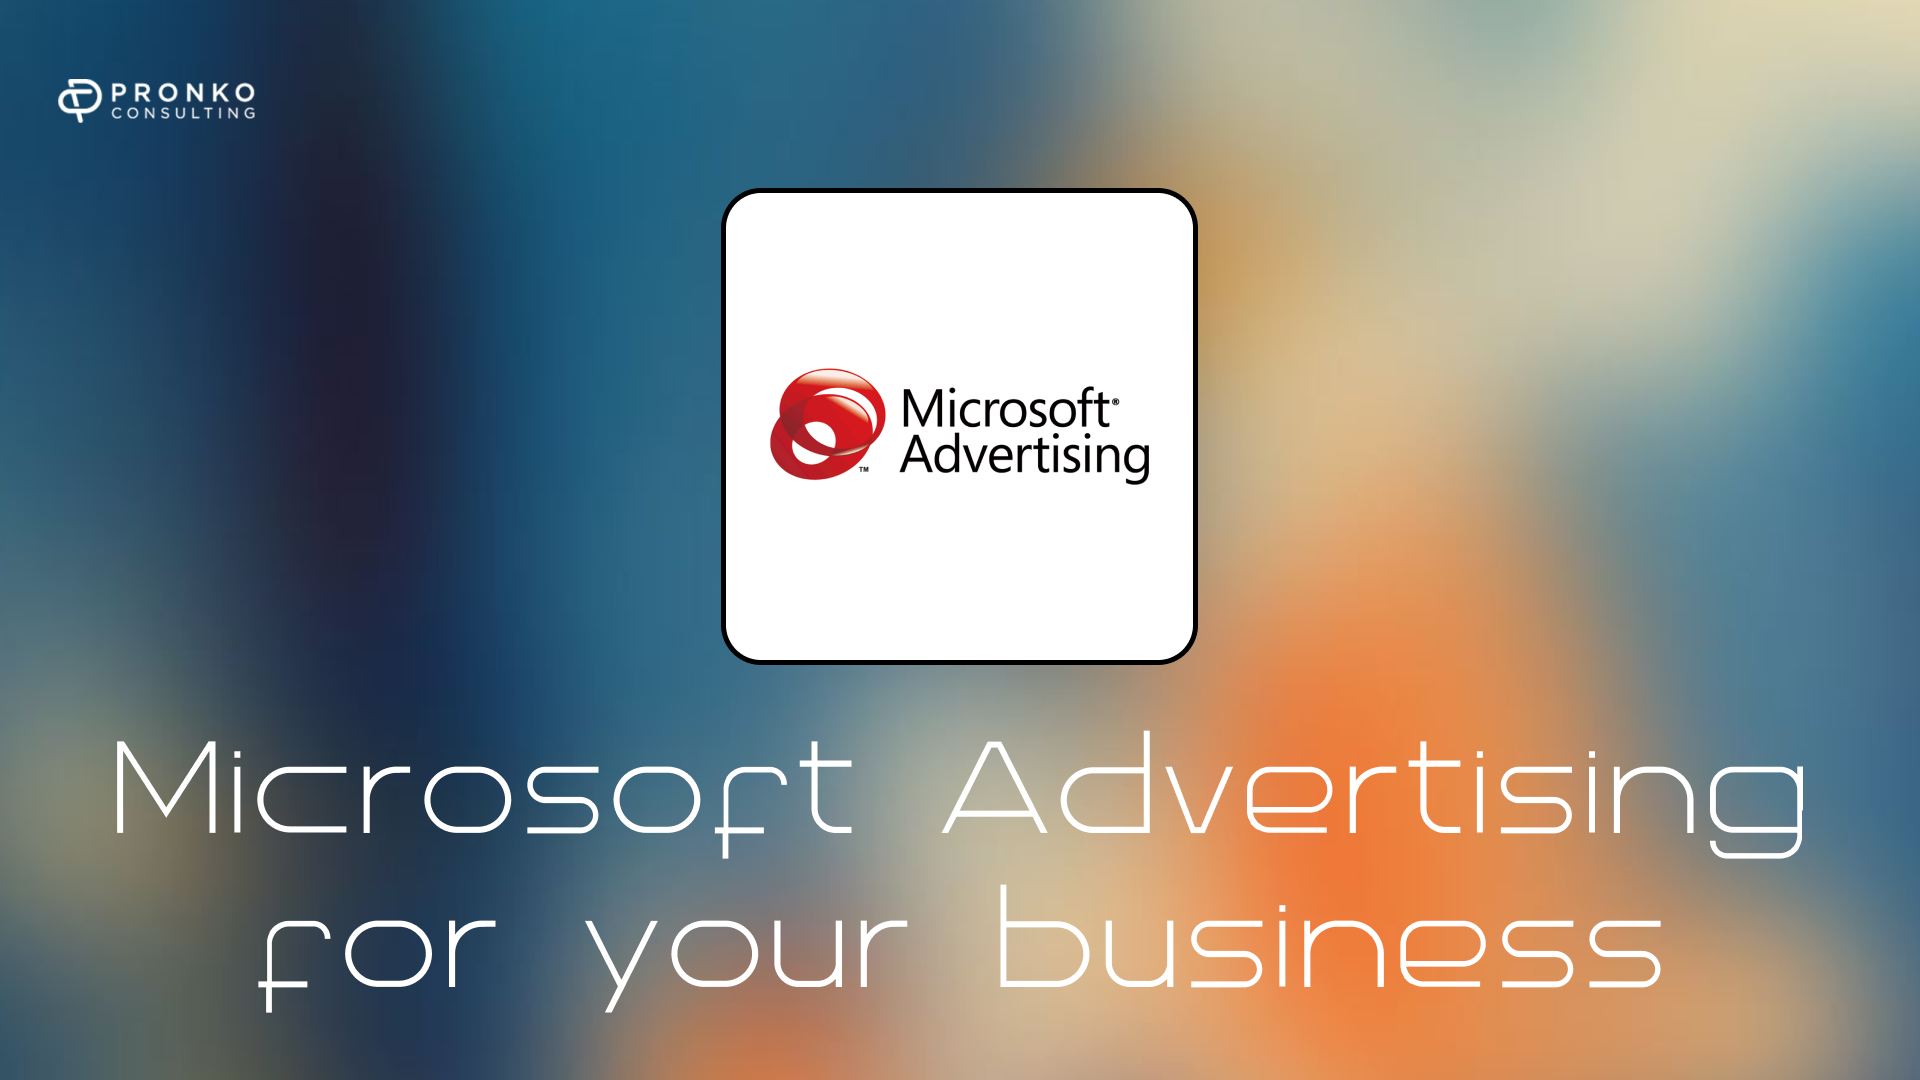 Is Microsoft Advertising right for your business?